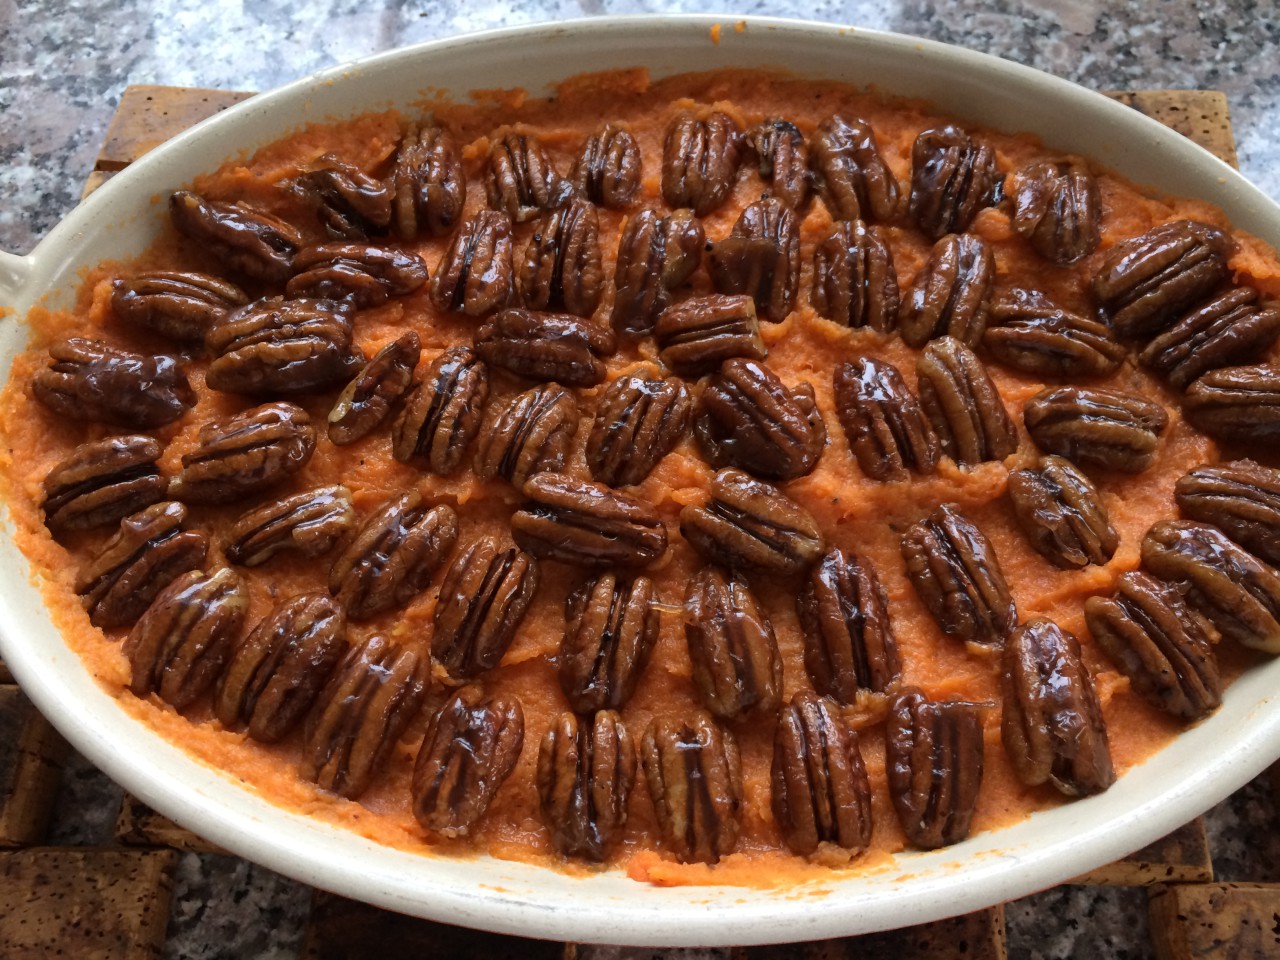 One of Kathy Gunst's lightened Thanksgiving recipes is sweet potatoes with candied pecan topping. (Kathy Gunst)